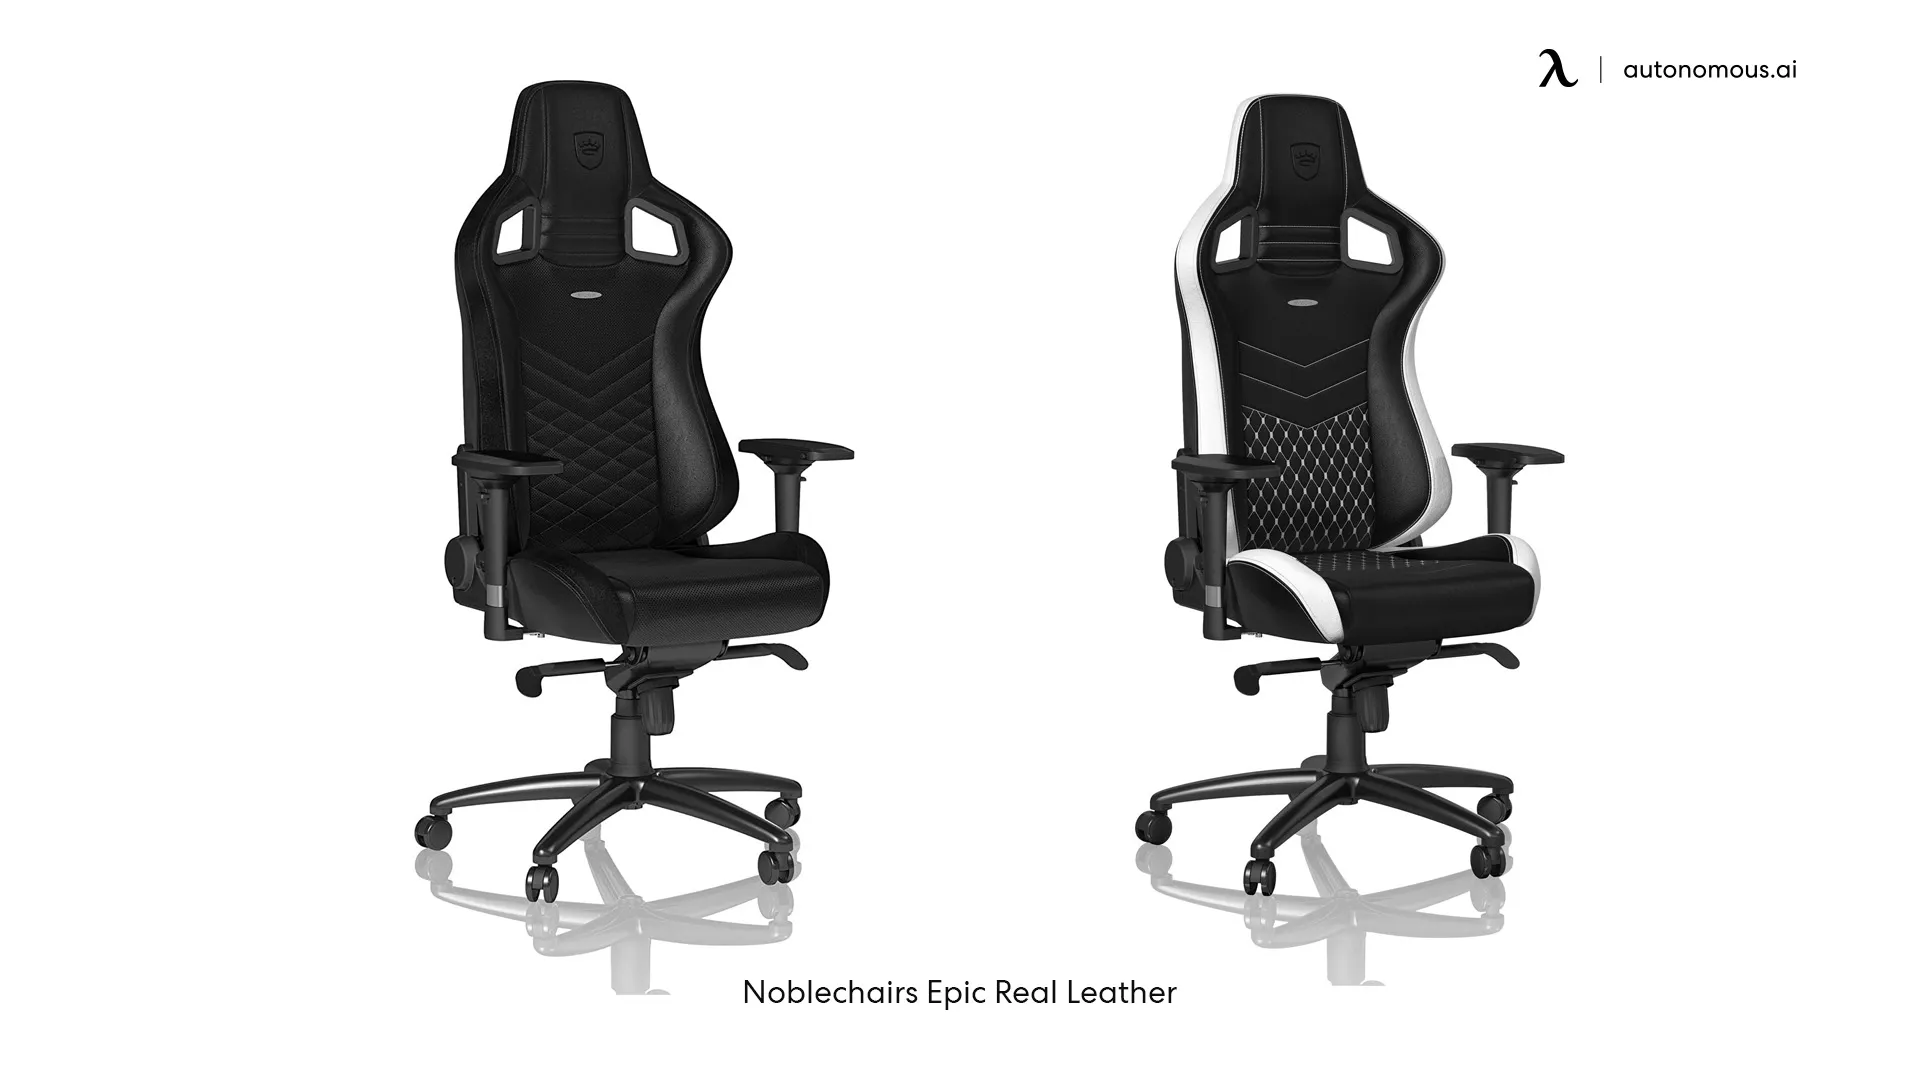 Noblechair Black and White Gaming Chair